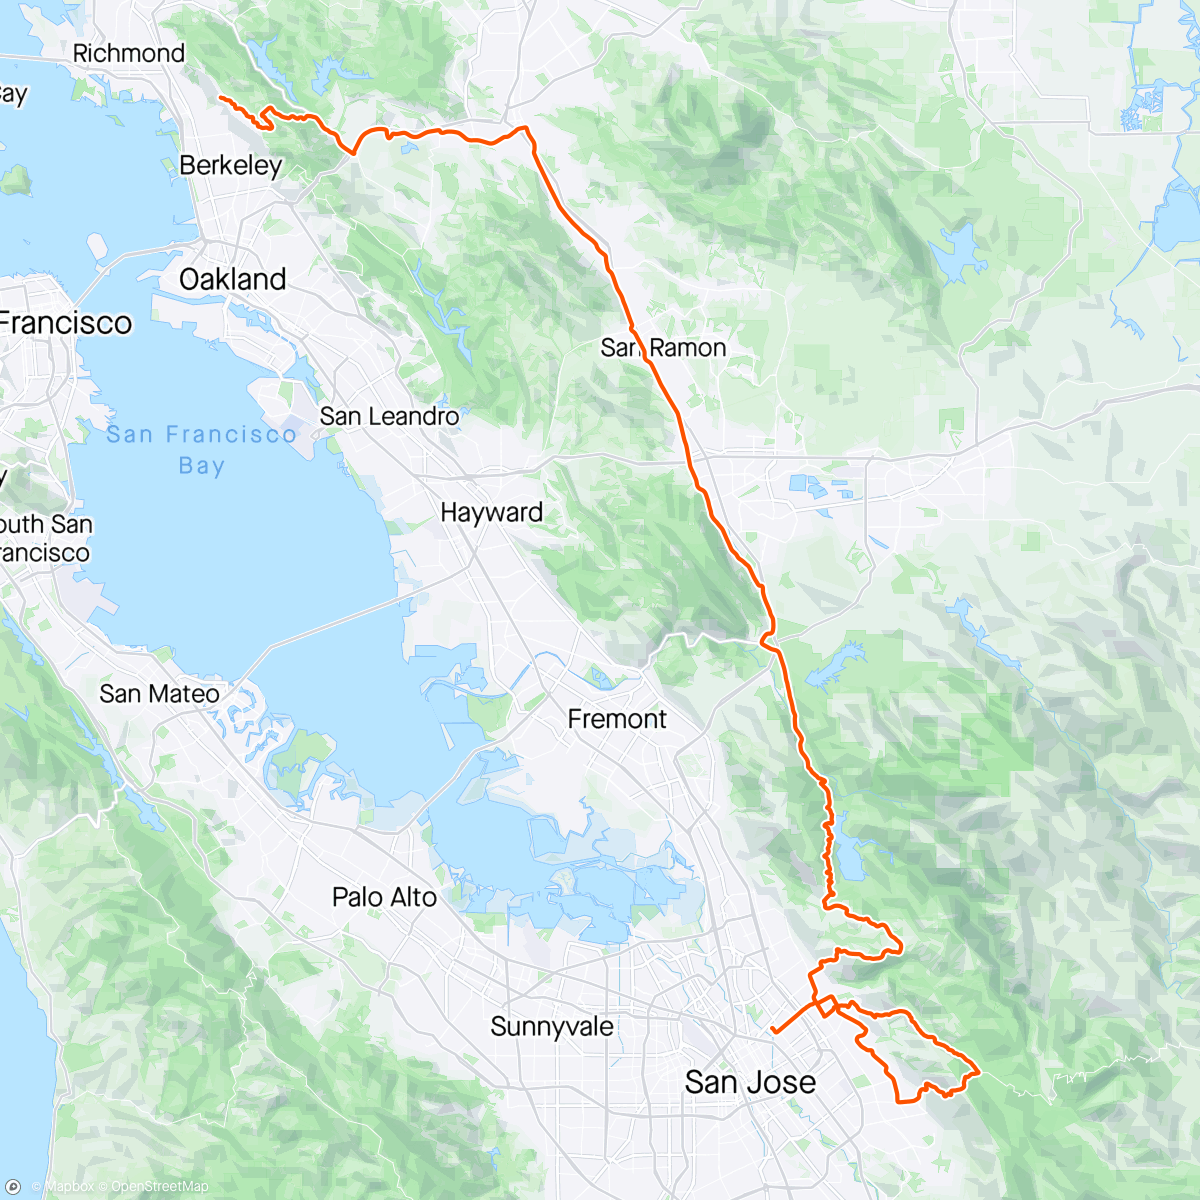 Map of the activity, Tom and I were  planning a longer ride, but had time constraints, so we did a short ride (part 1) - Kensington/Calaveras/Felter//Quimby/bart